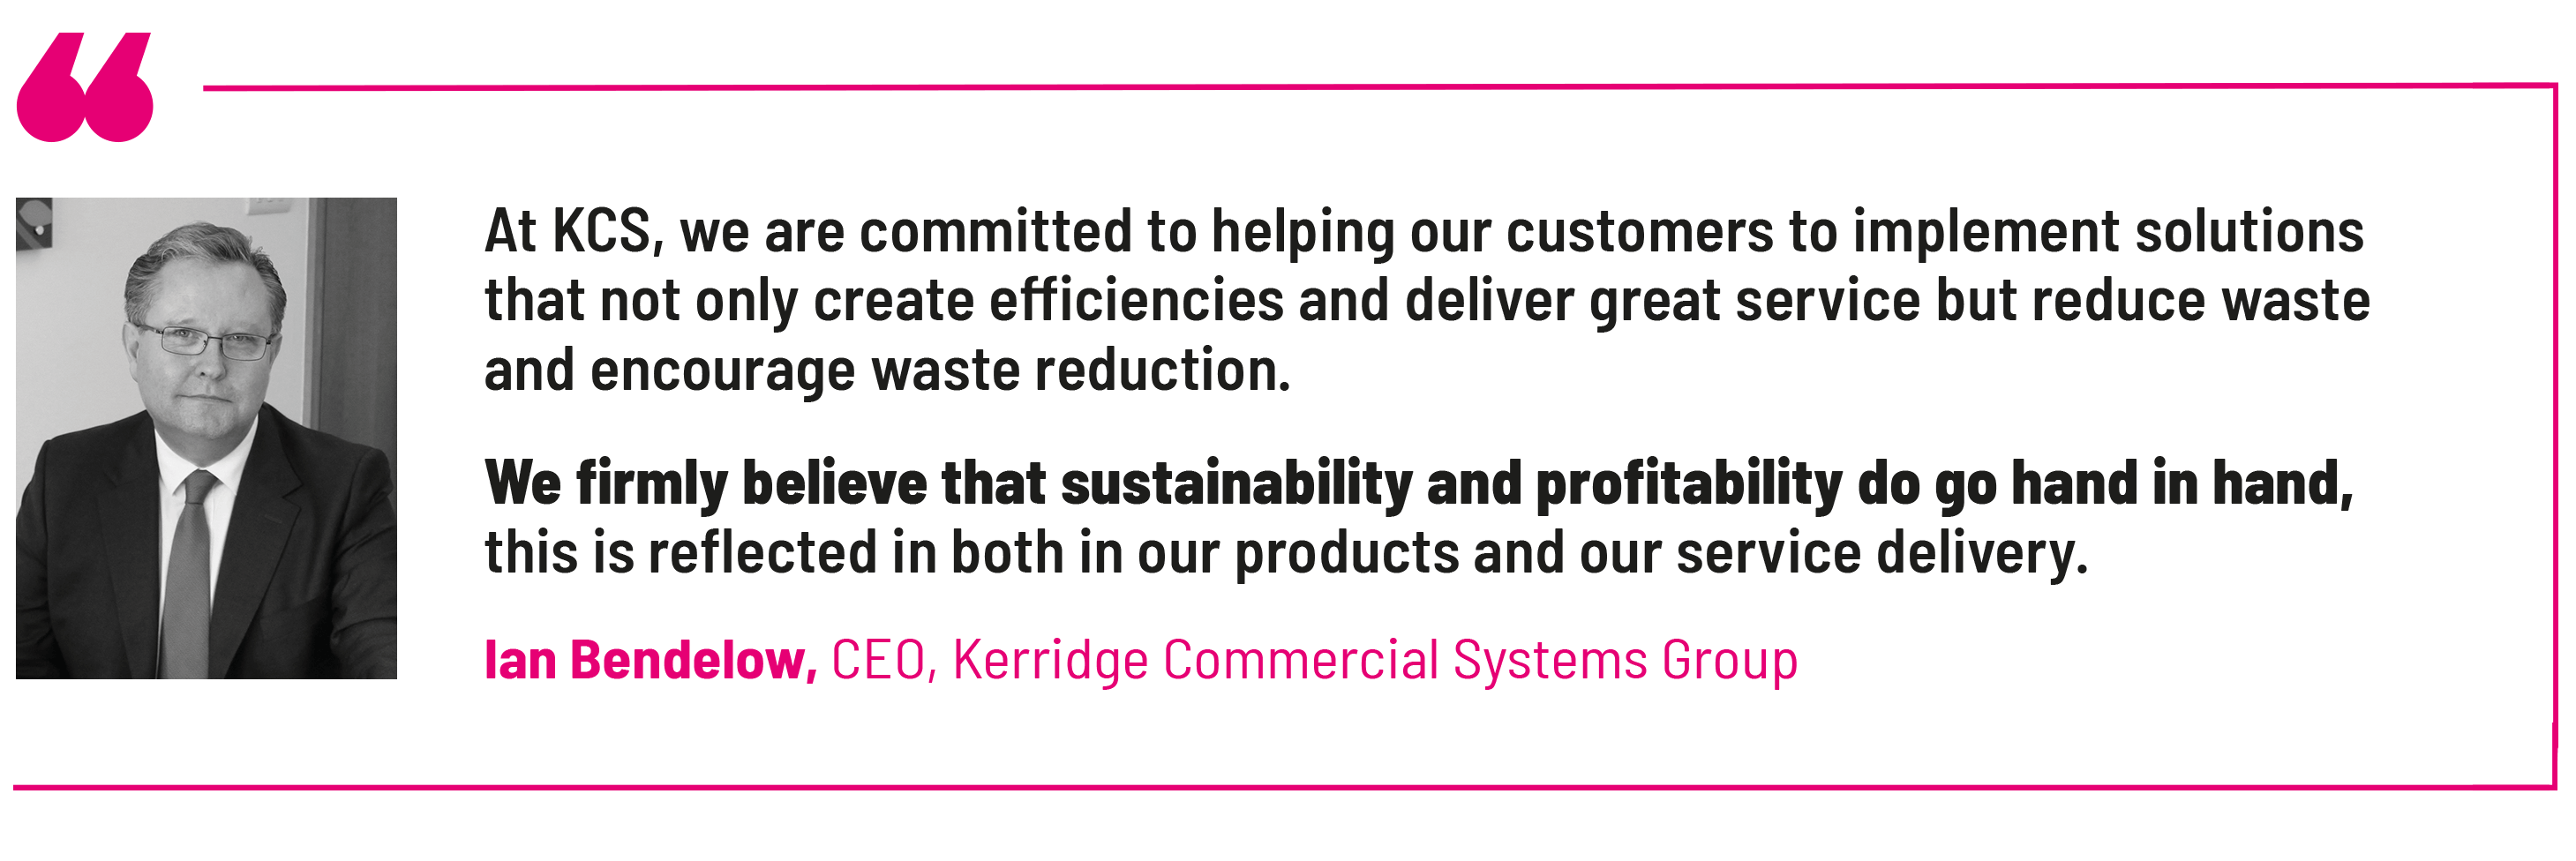 At KCS, we are committed to helping our customers to implement solutions that not only create efficiencies and deliver great service but reduce waste and encourage waste reduction.